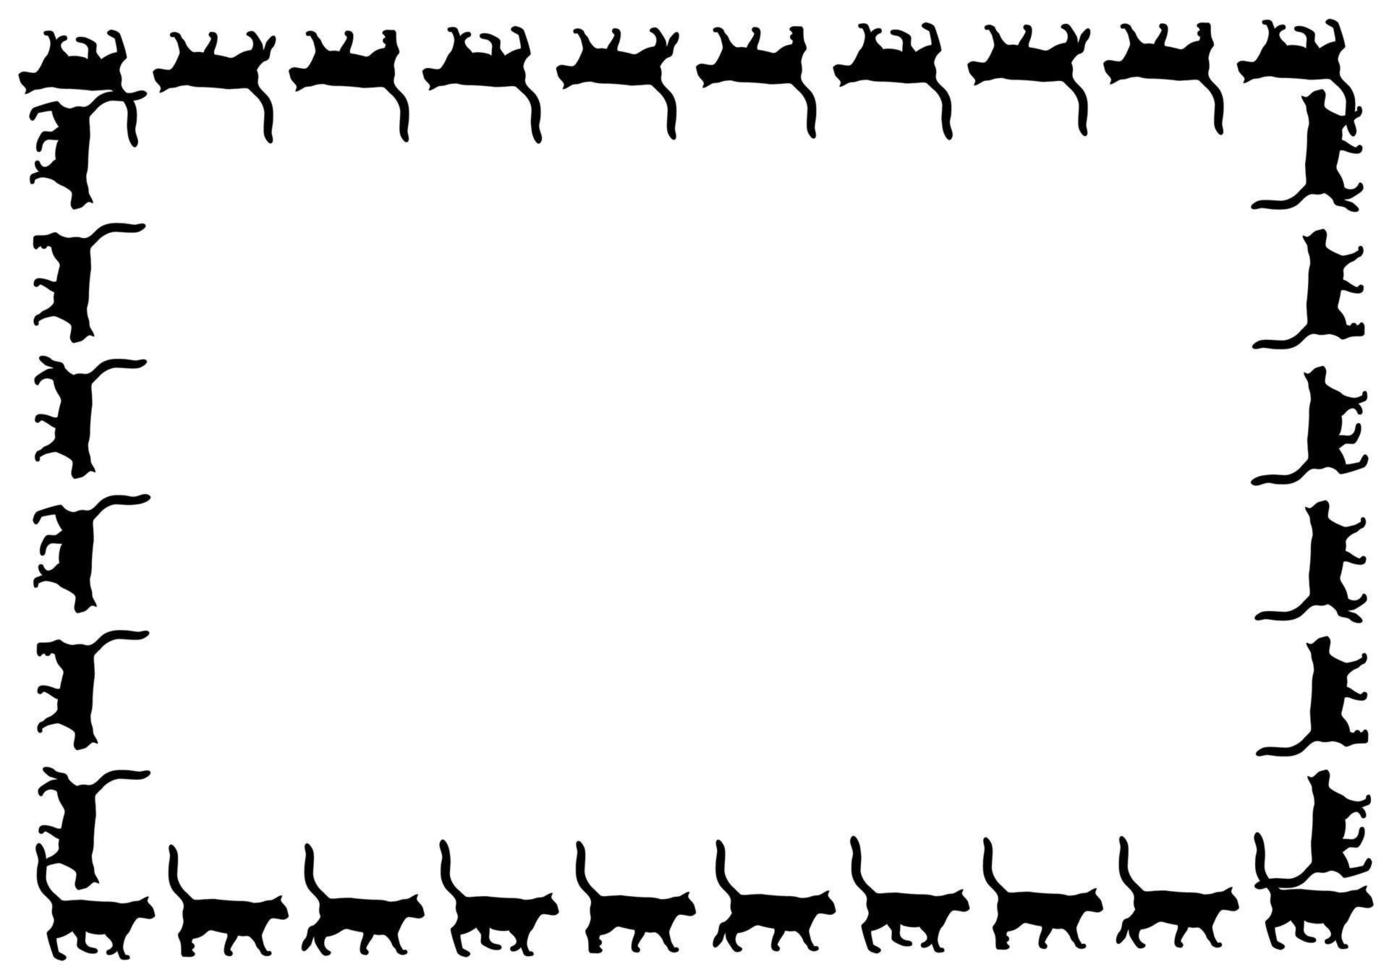 Frame with black cats vector